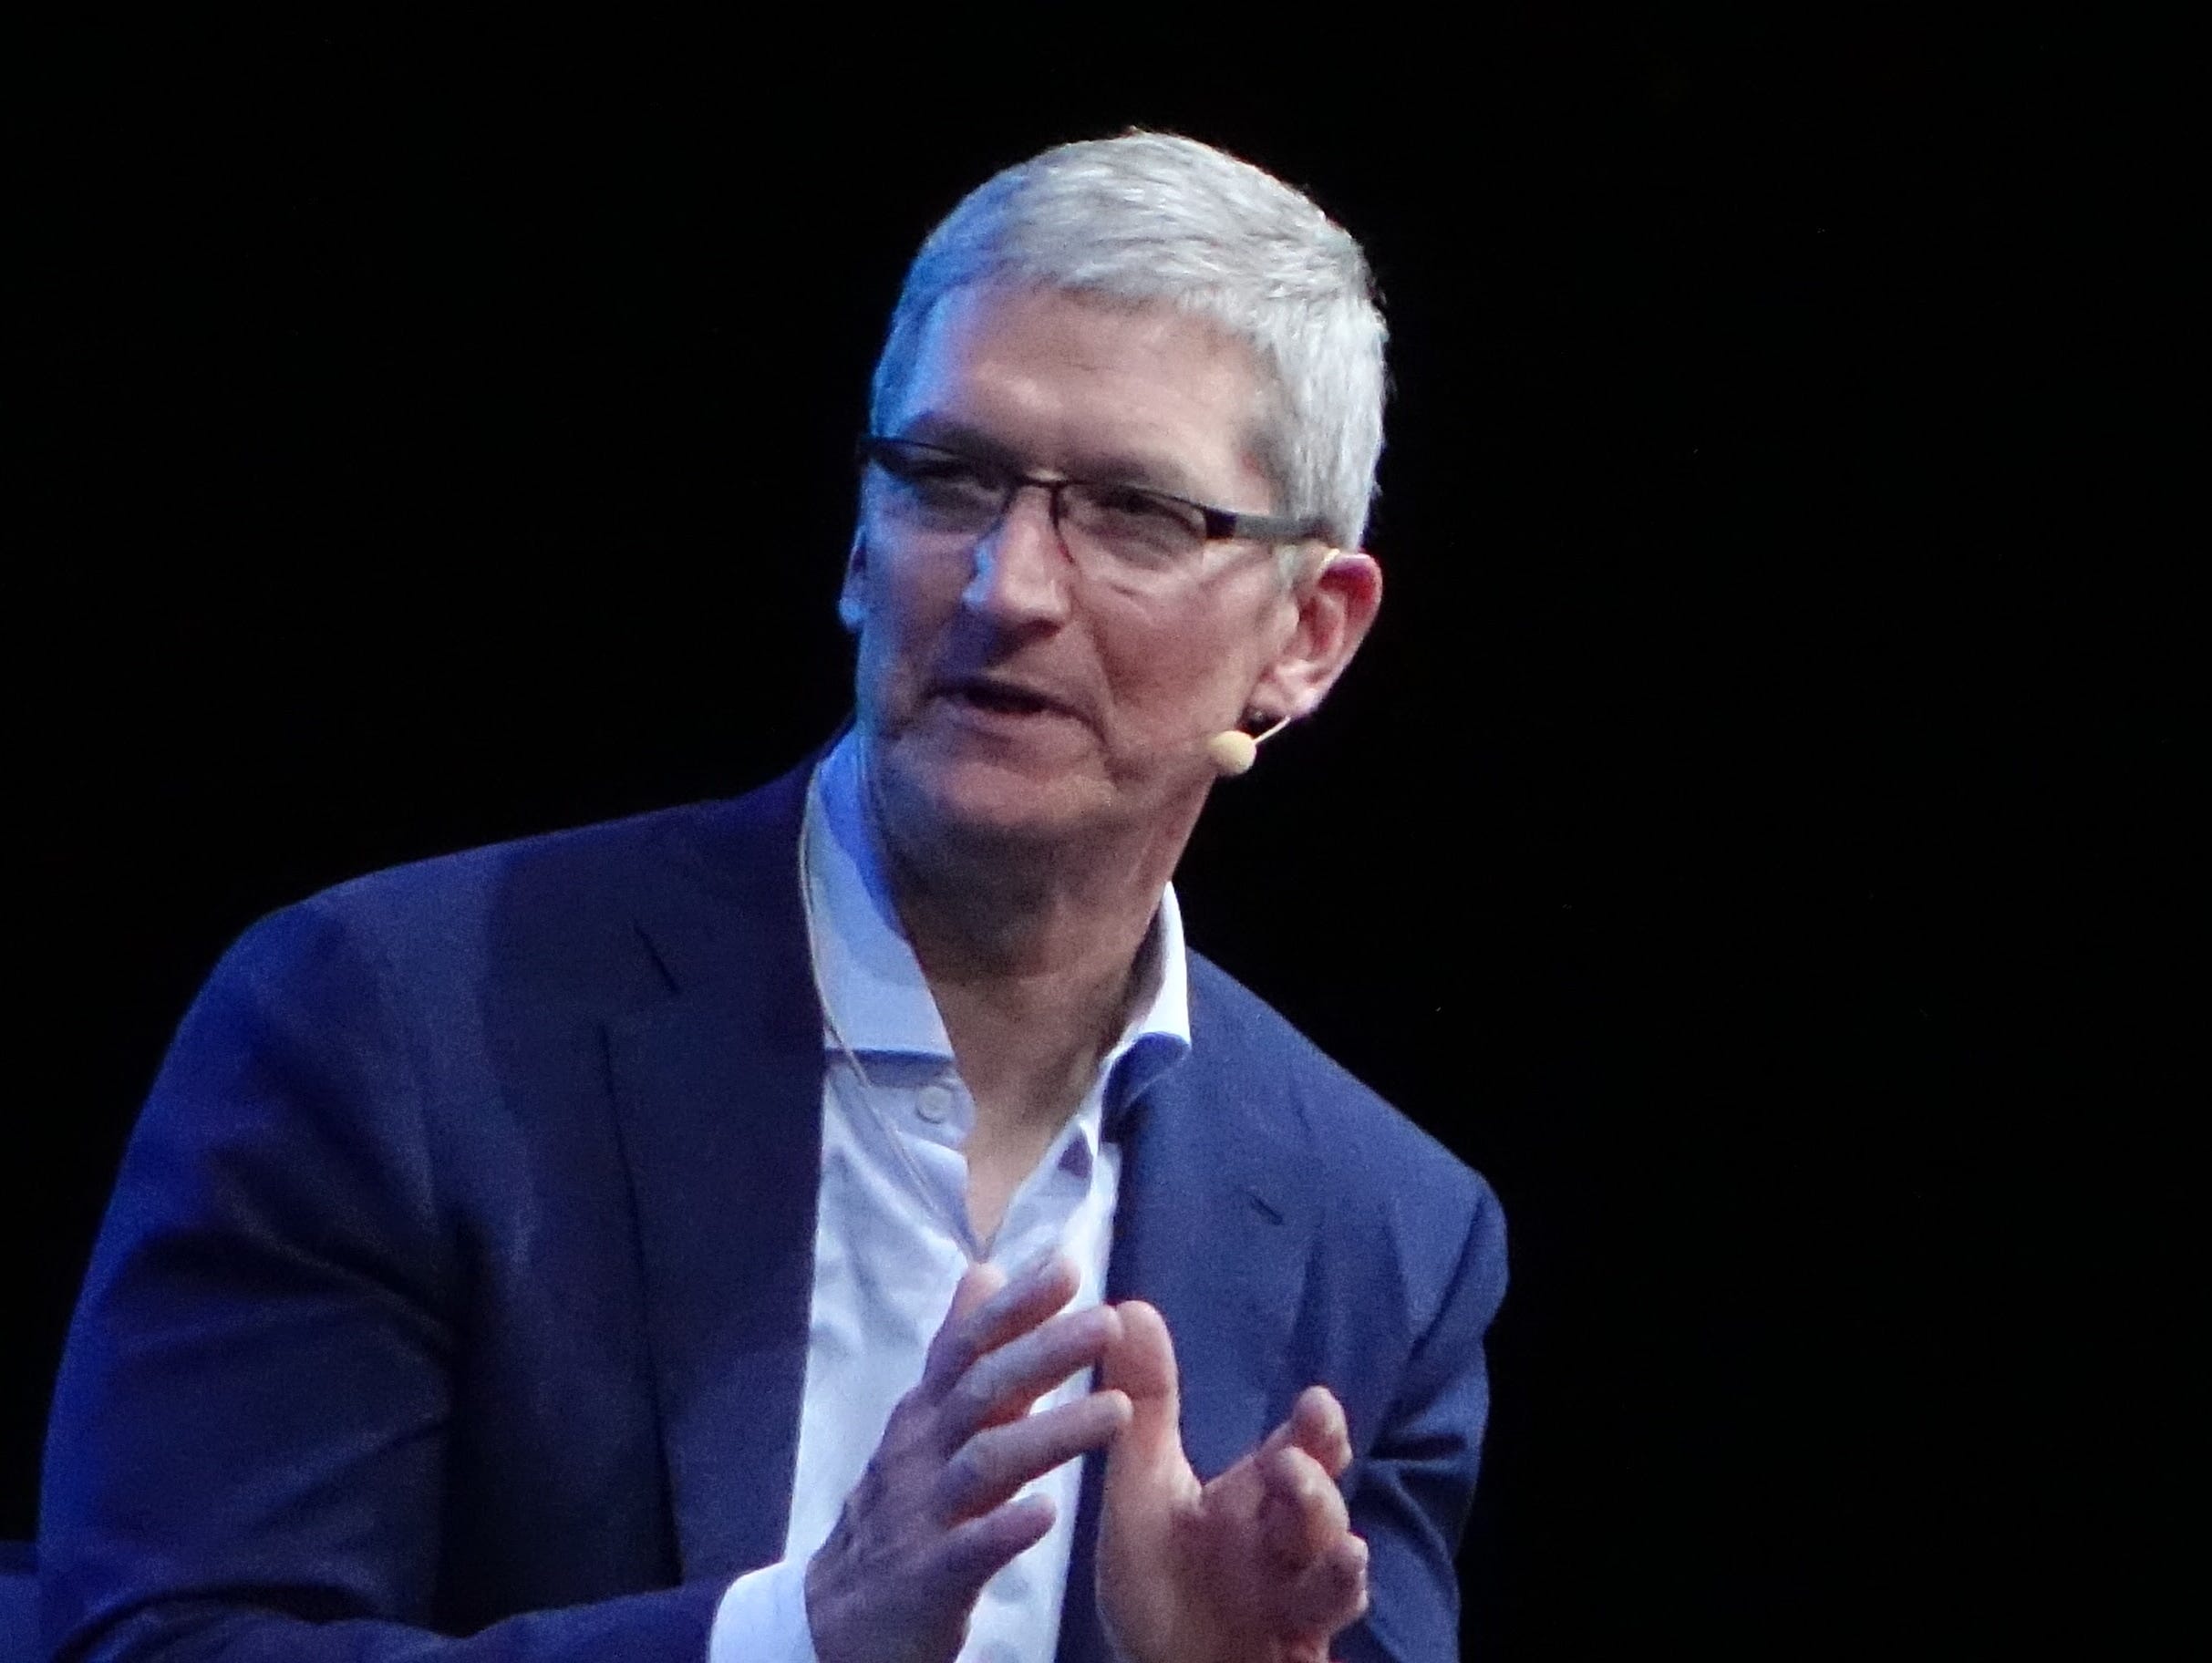 Apple CEO Tim Cook speaking Oct. 19 at the Wall Street Journal's WSJ.D Live in Laguna Beach, Calif.